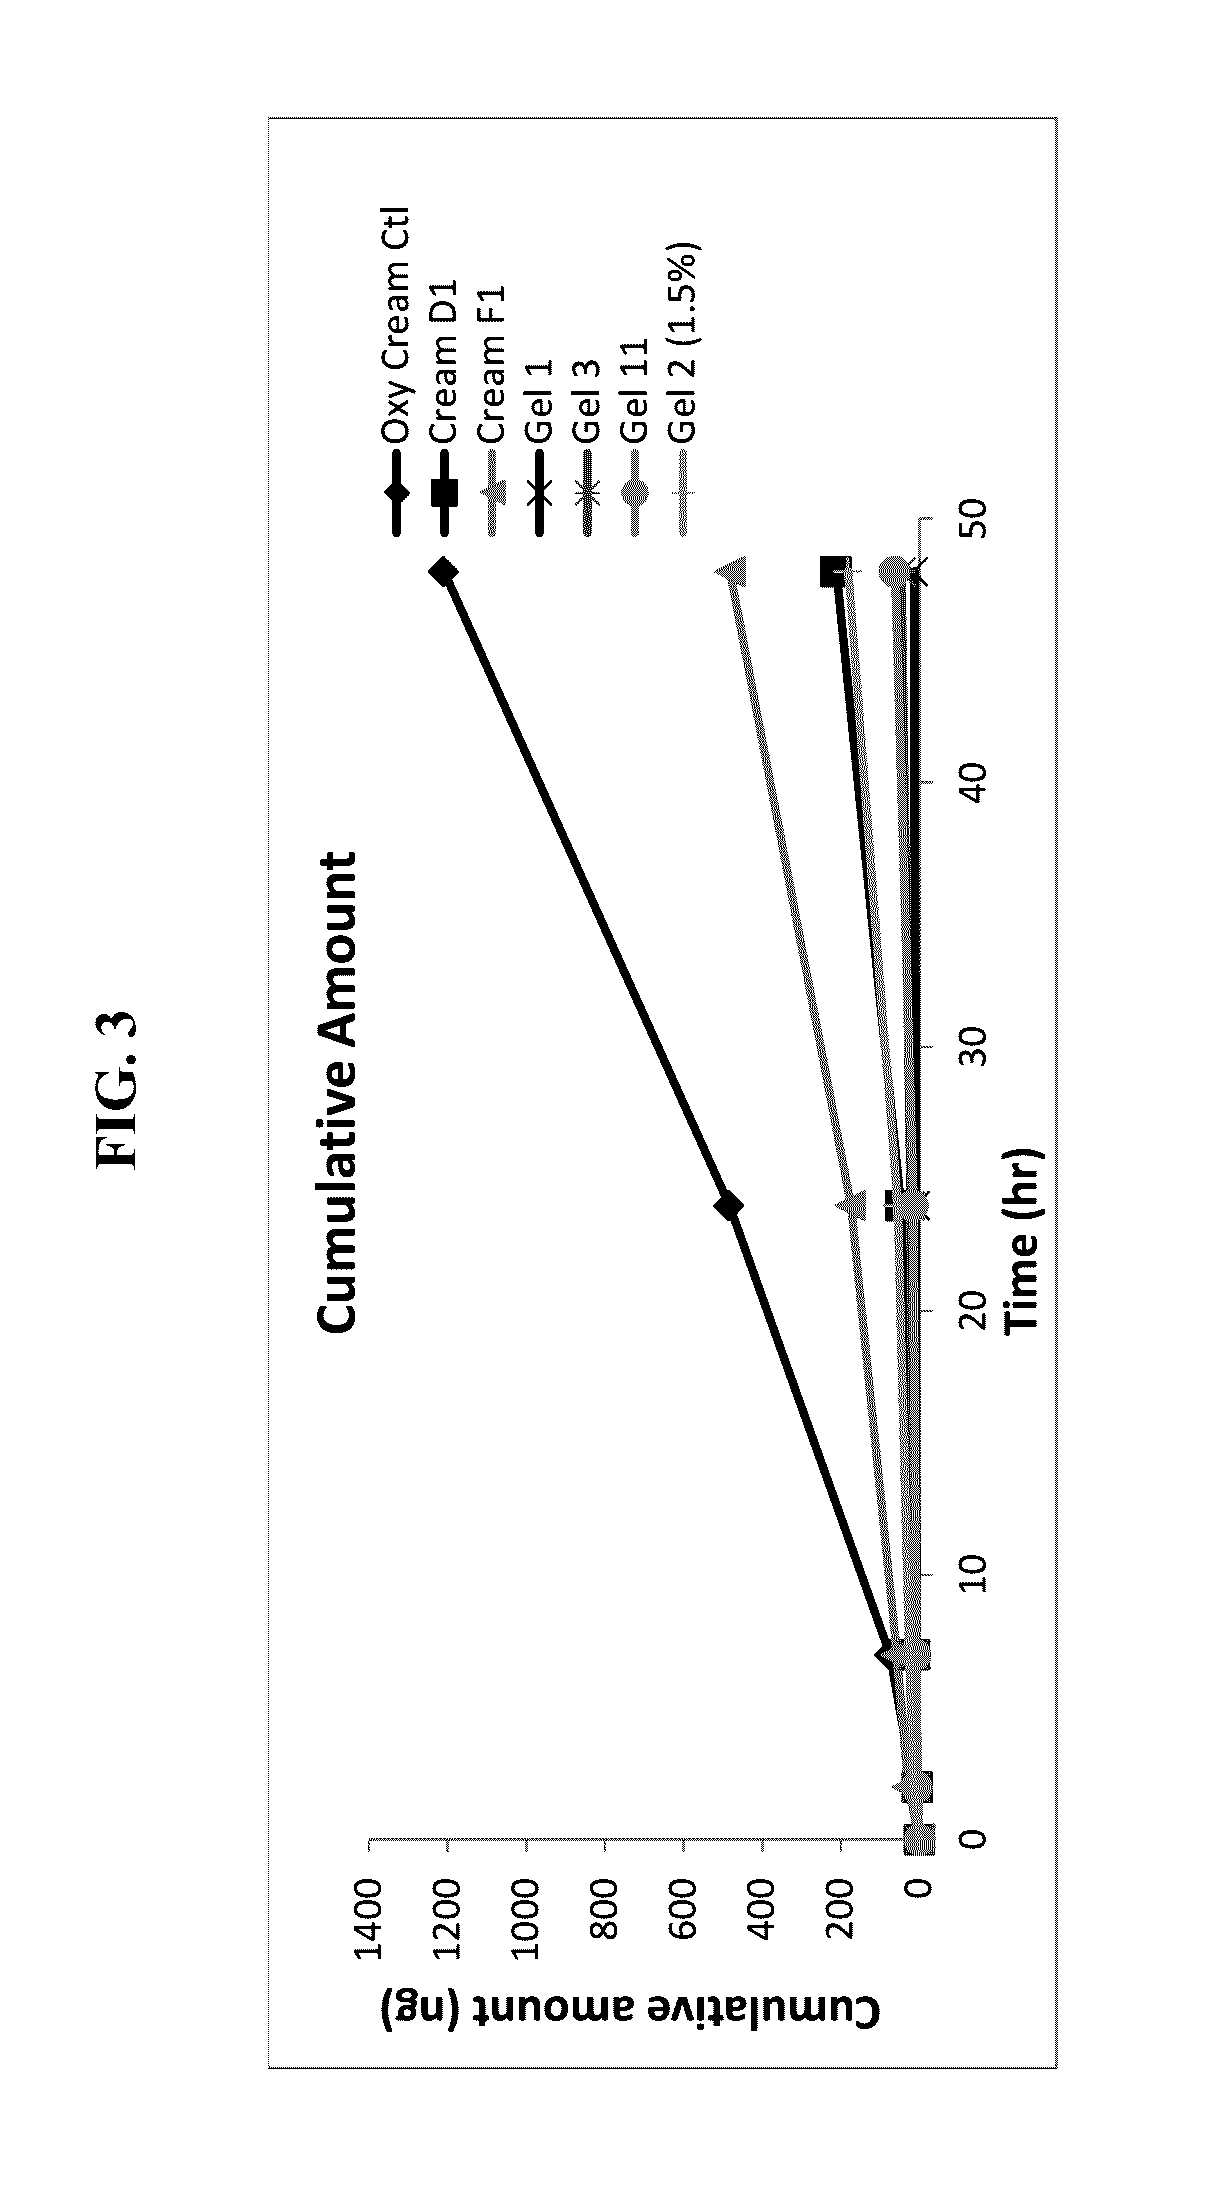 Stabilized oxymetazoline formulations and their uses